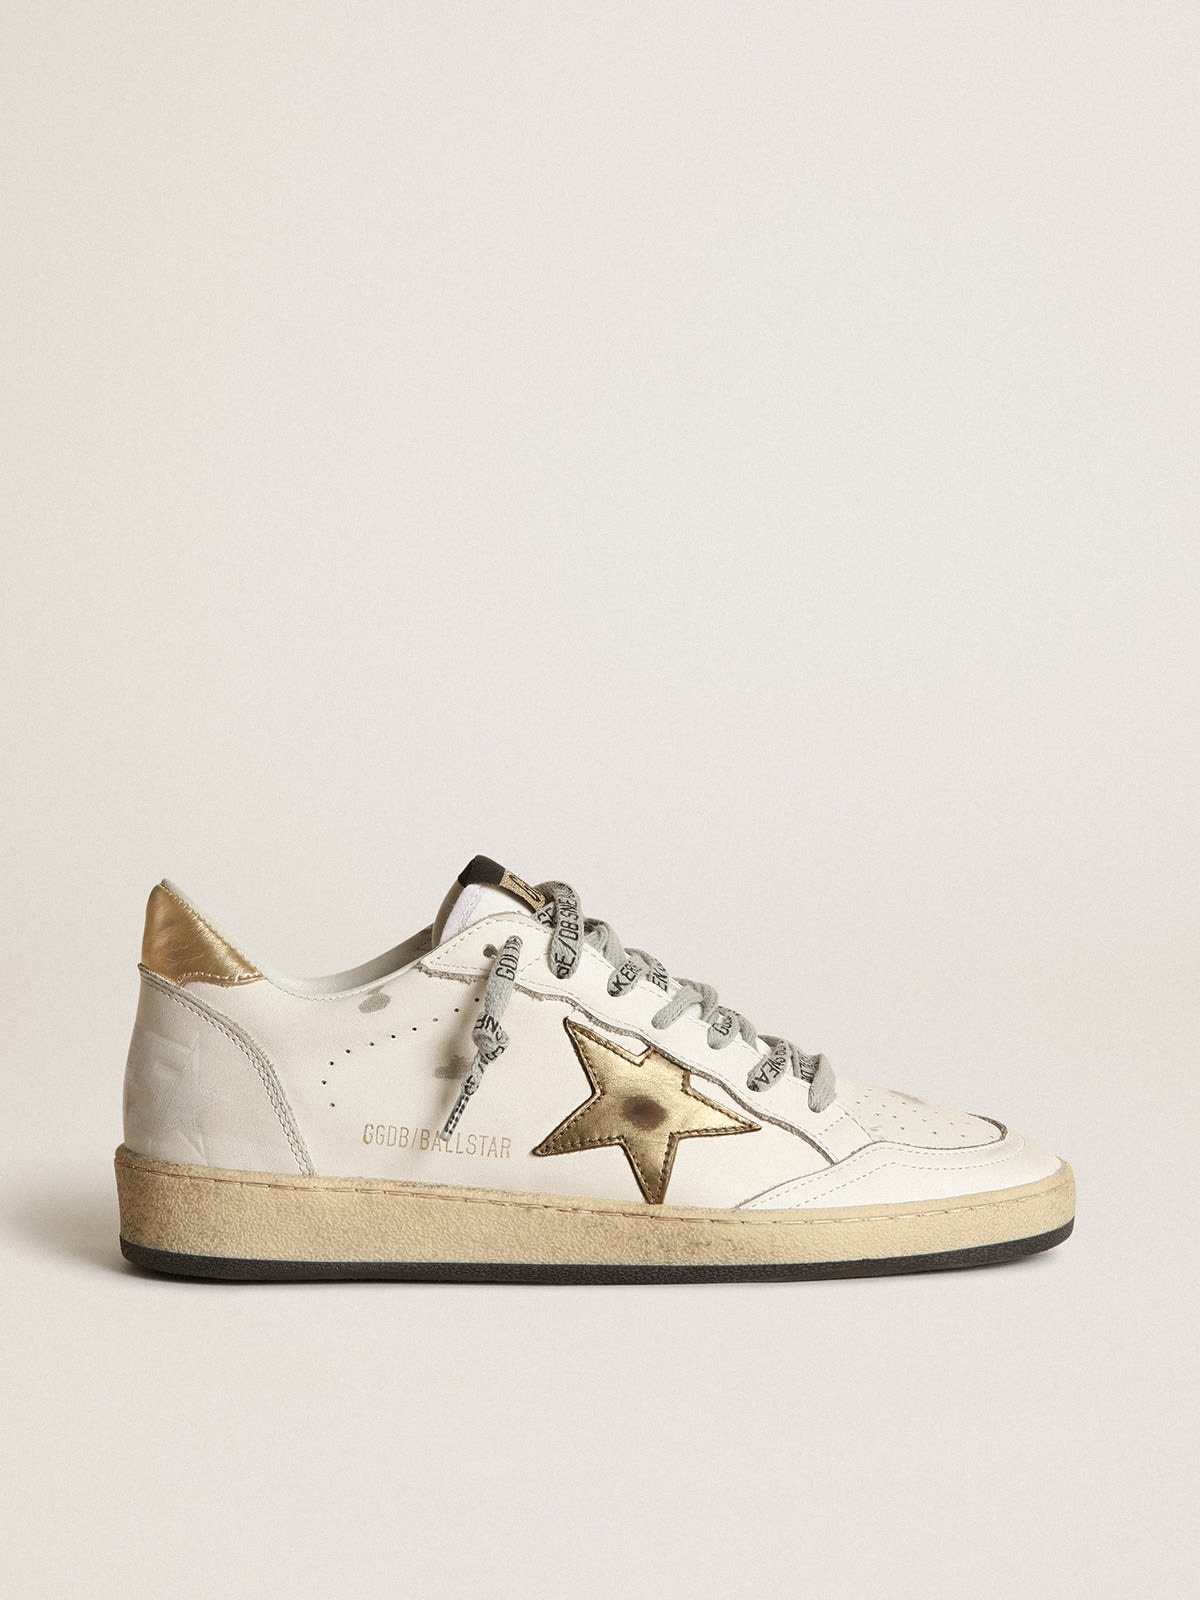 Ball Star sneakers with gold star and heel tab - 1